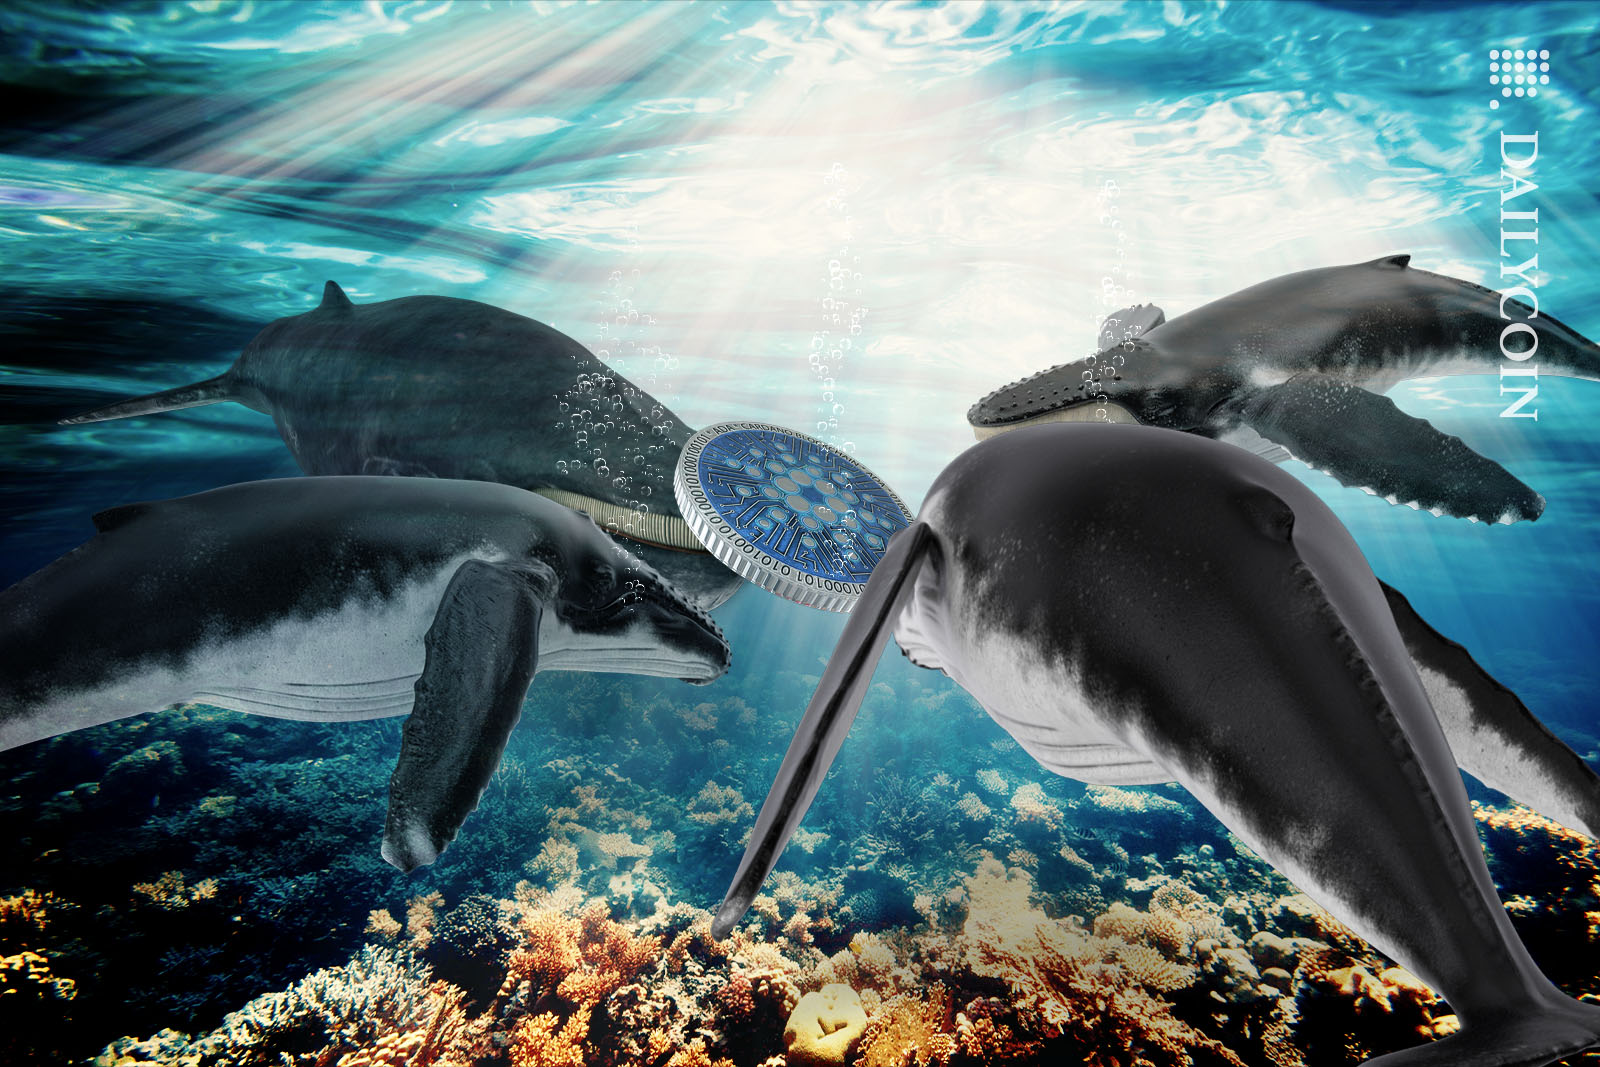 Four whales checking out a Cardano coin floating around under water.